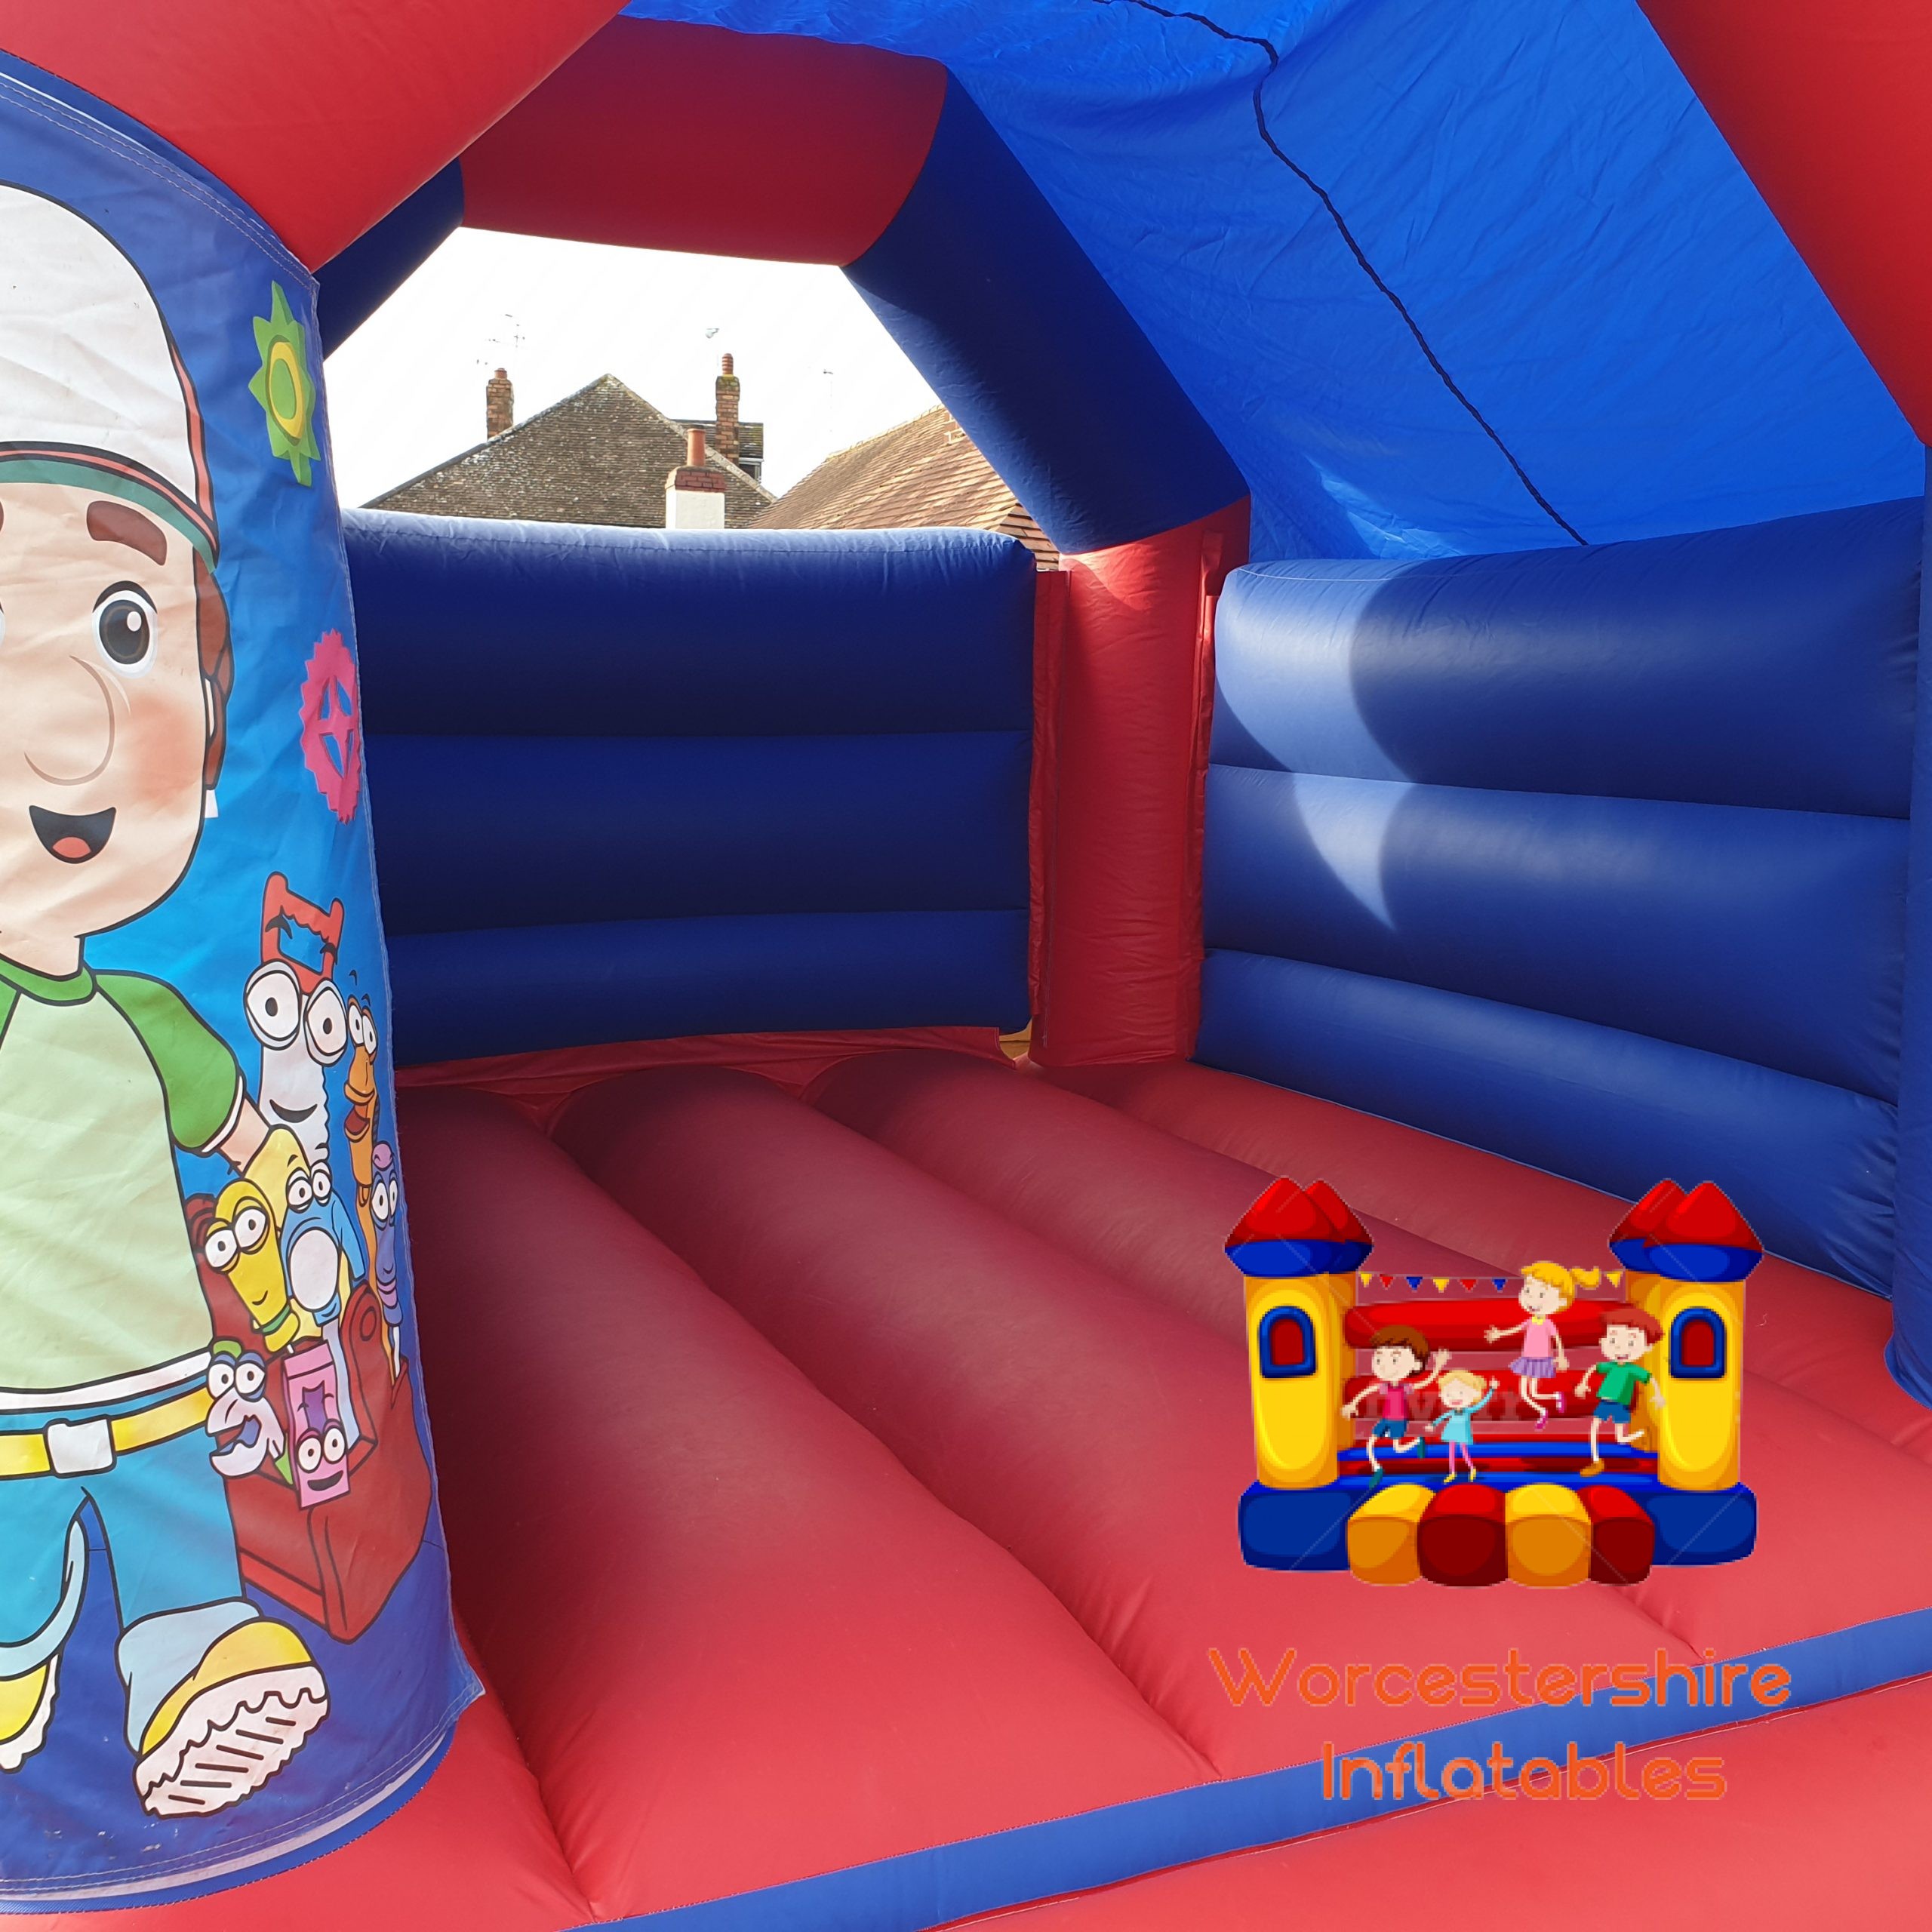 themed bouncy castle - Worcestershire Inflatables